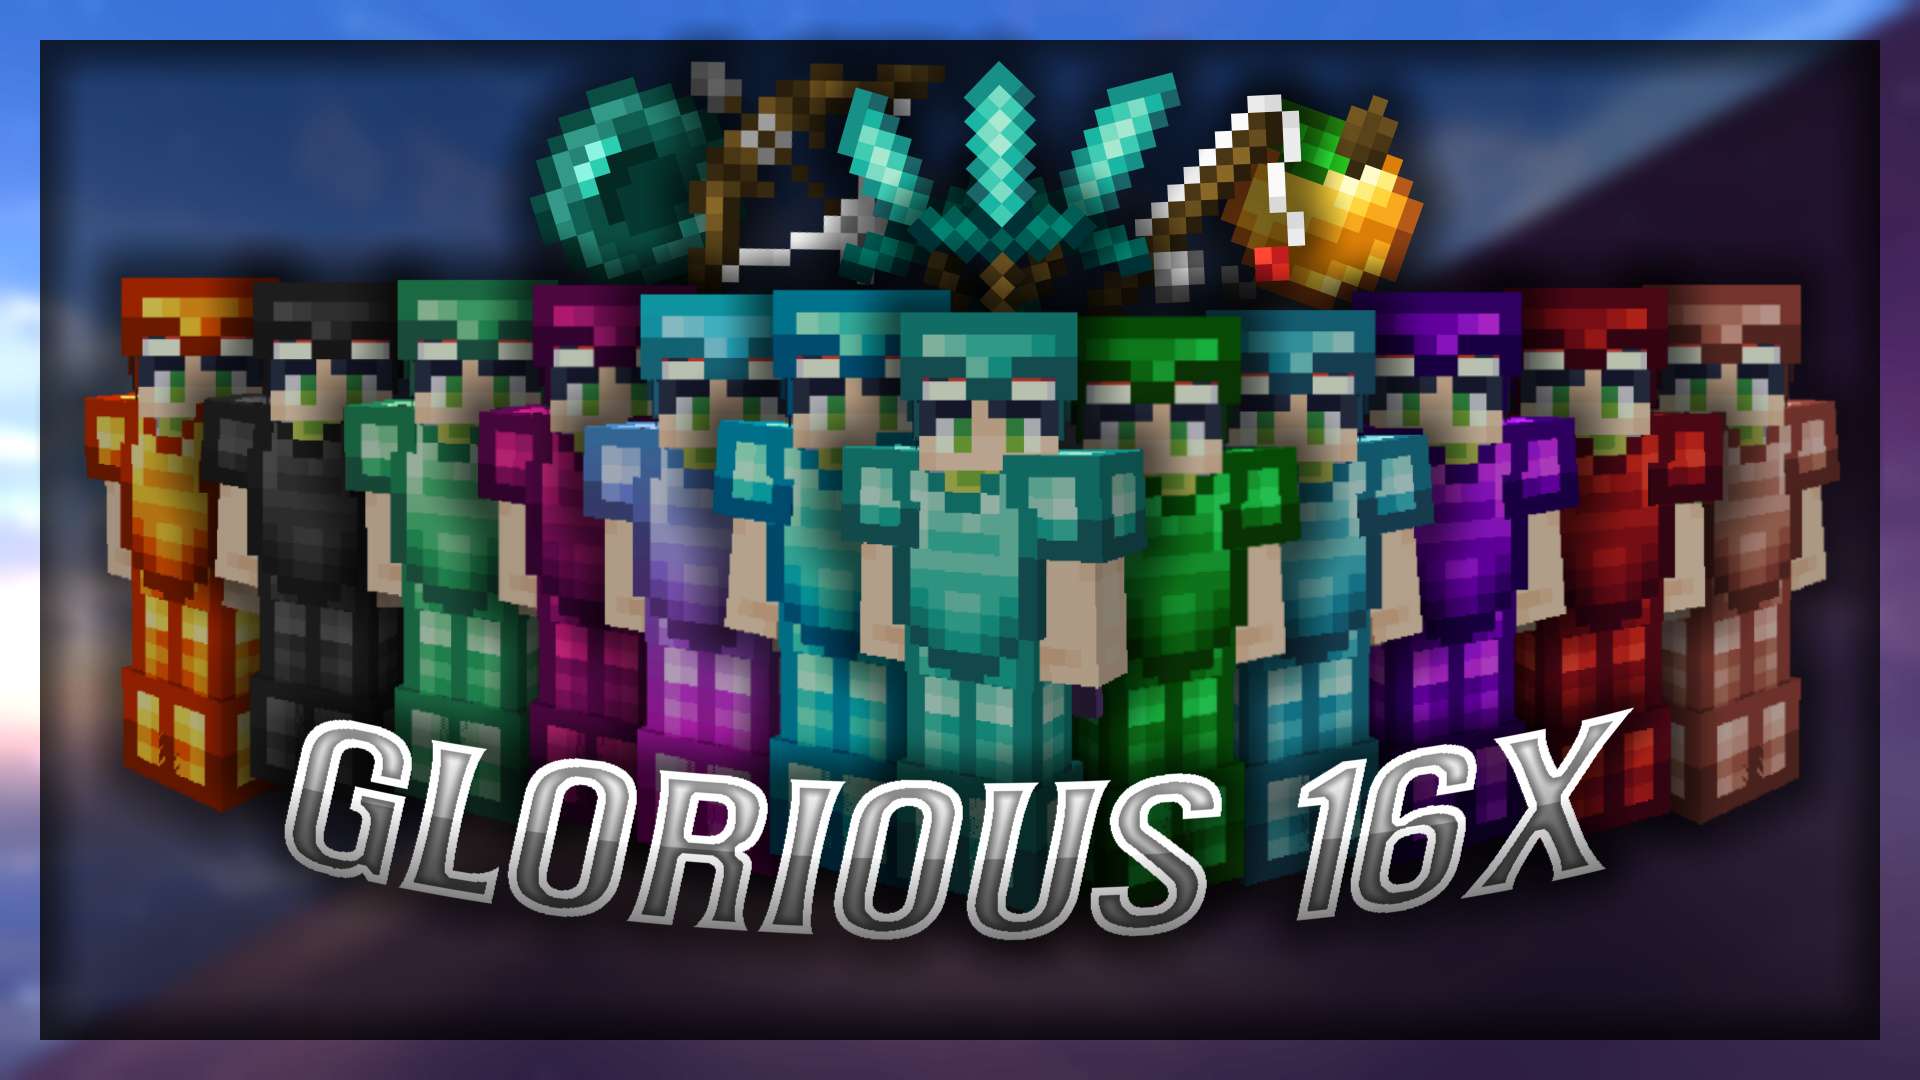 (open zip with WinRAR) Glorious - Autumn 16 by Mek on PvPRP